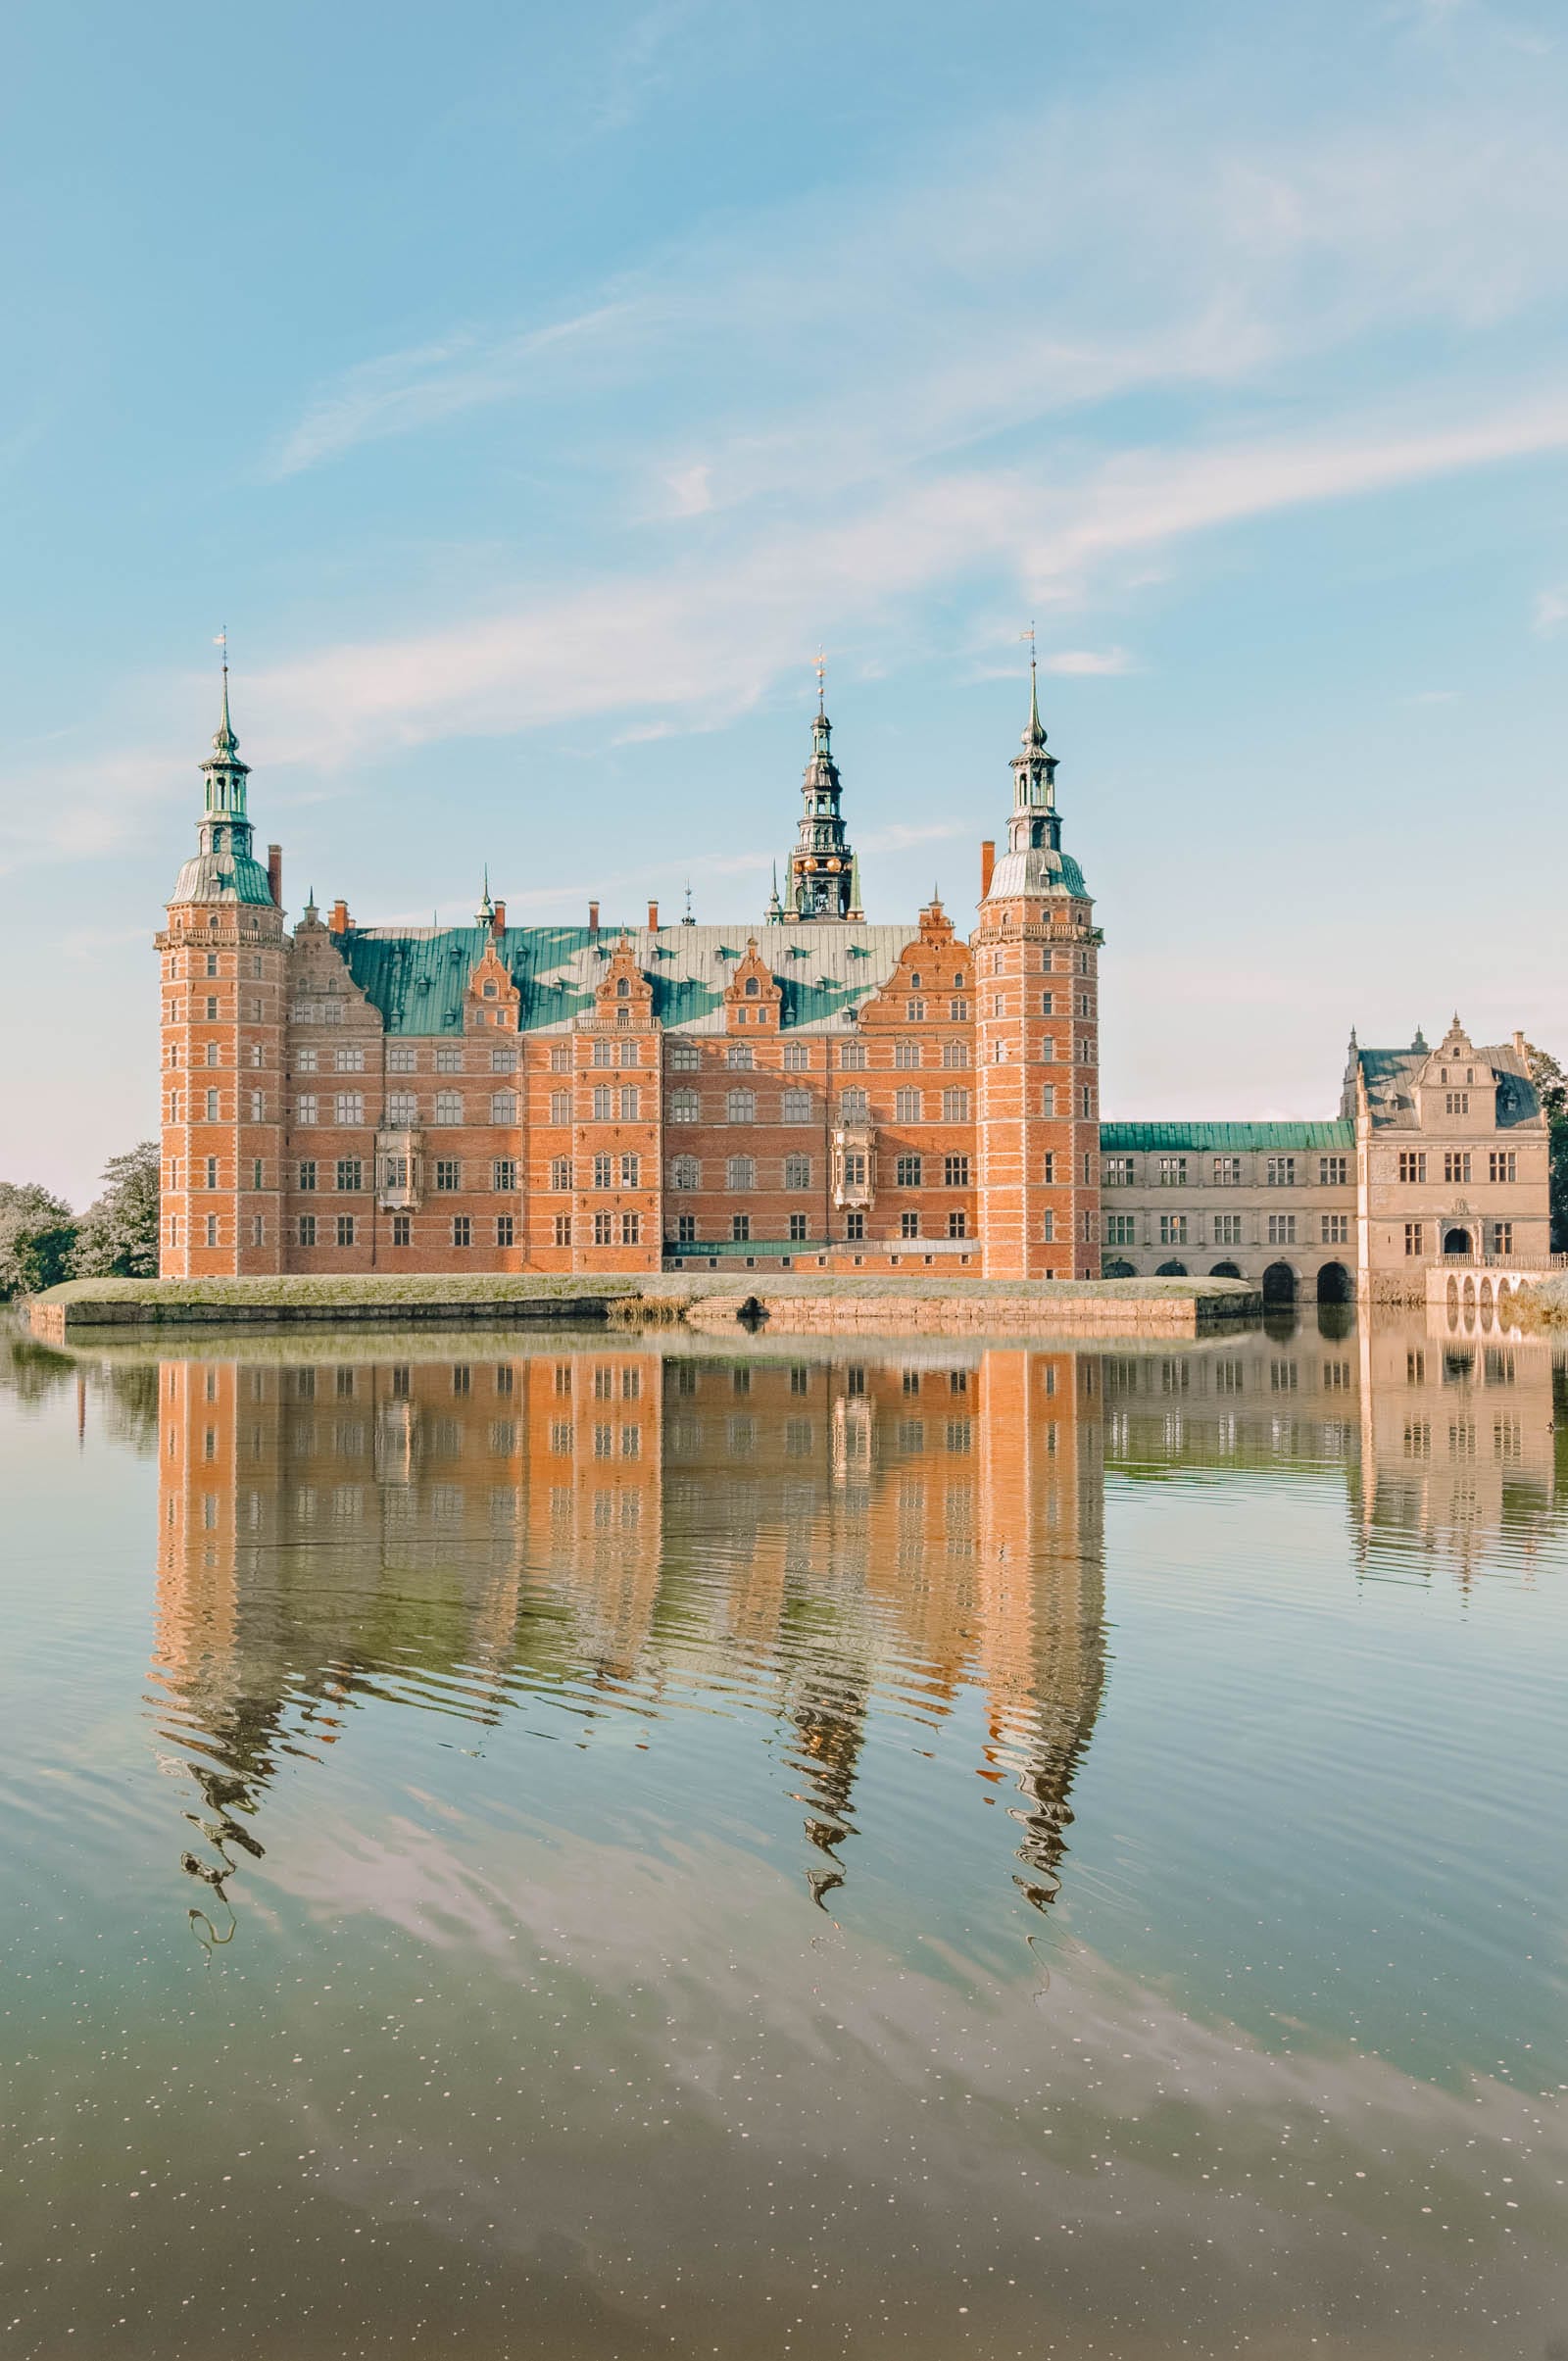 9 Beautiful Villages And Towns To Visit in Denmark - Hand 